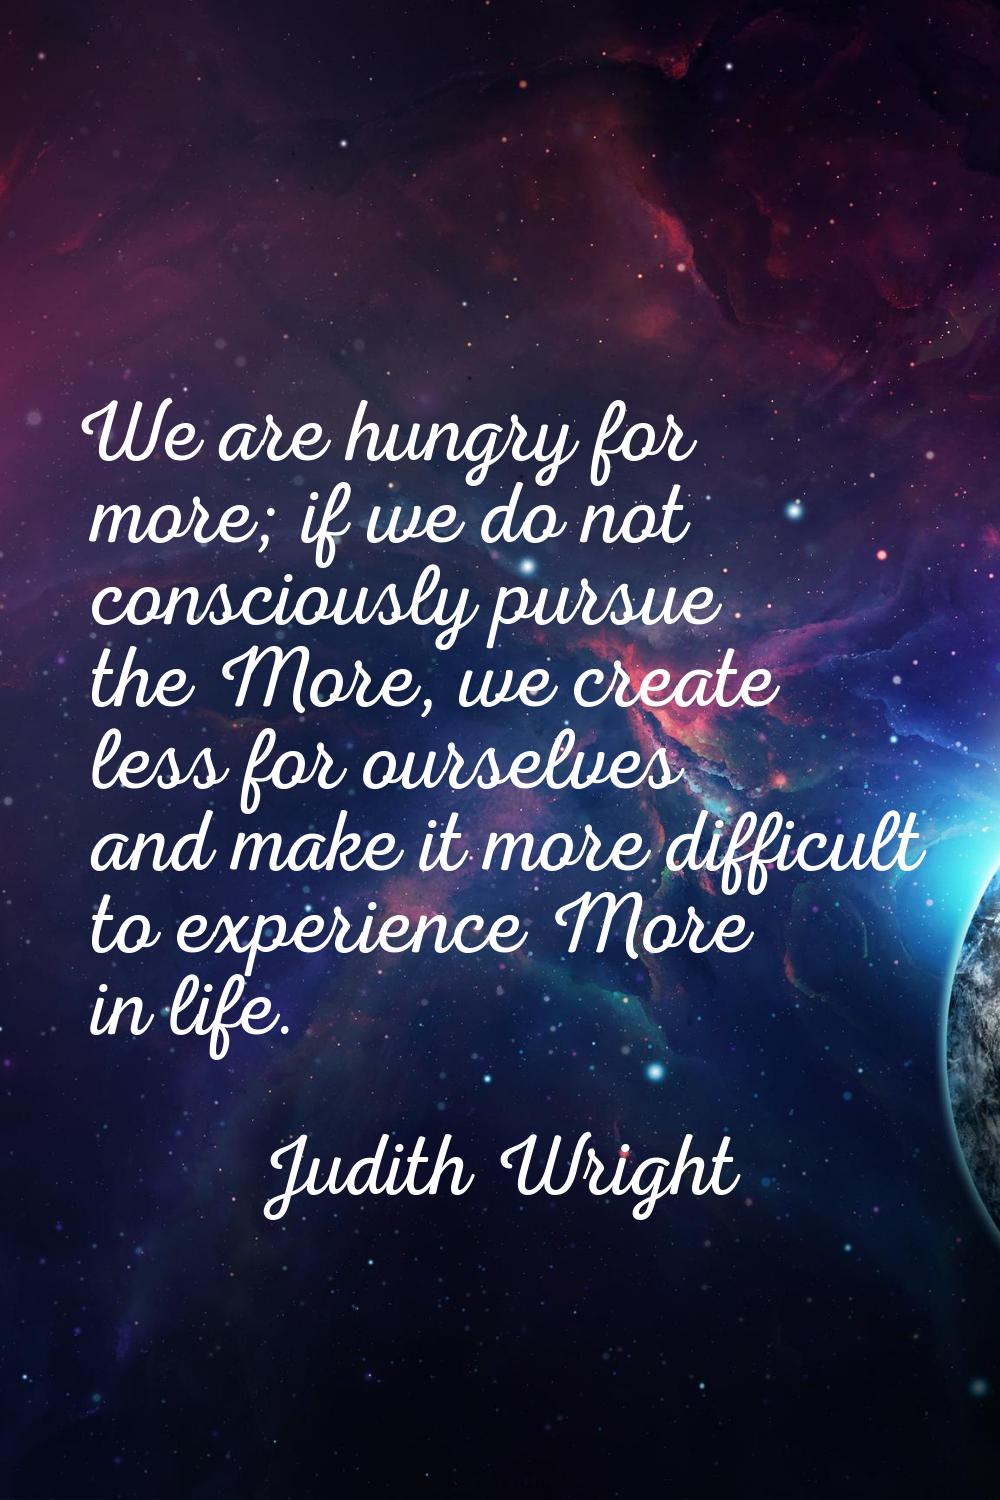 We are hungry for more; if we do not consciously pursue the More, we create less for ourselves and 